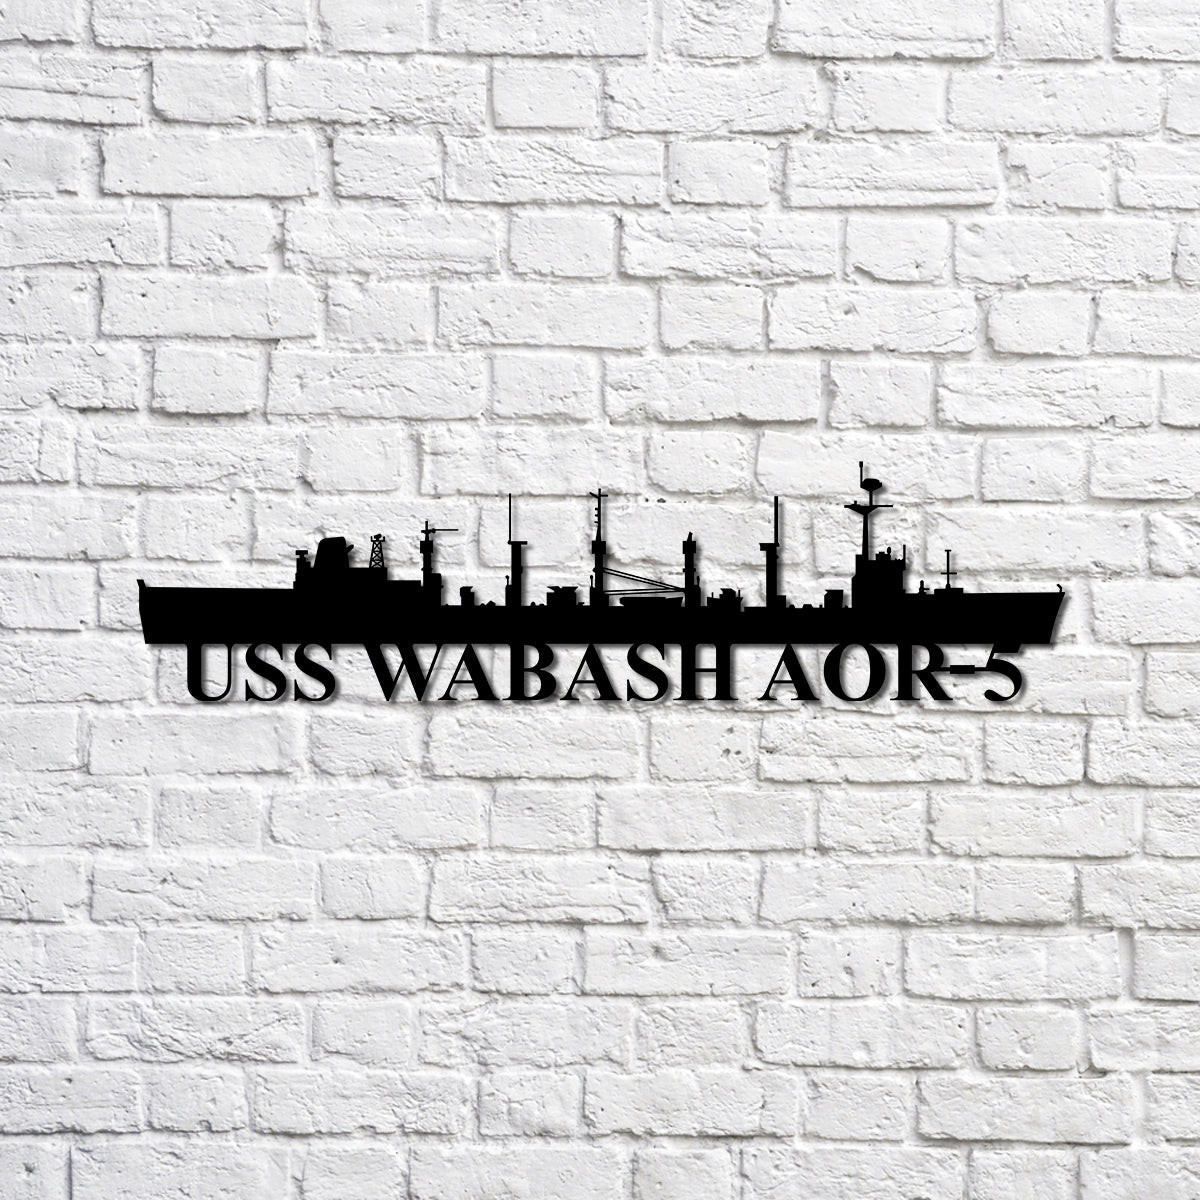 RosabellaPrint Uss Wabash Aor5 Navy Ship Metal Sign, Memory Wall Metal Sign Gift For Navy Veteran, Navy Ships Silhouette Metal Sign Laser Cut Metal Signs Custom Gift Ideas 12x12IN